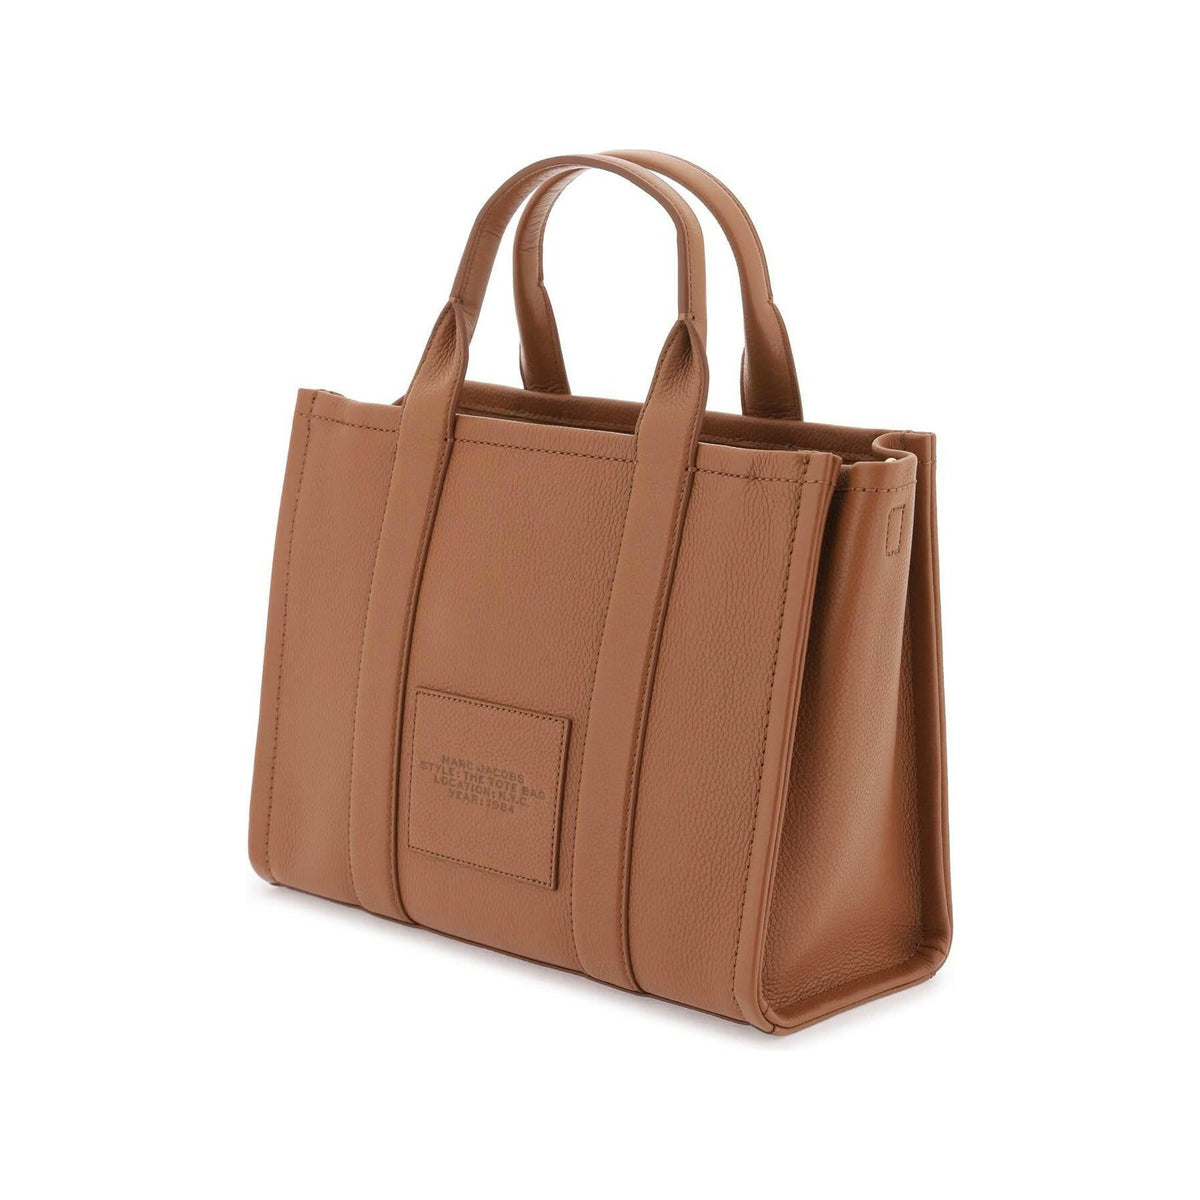 The Leather Small Tote Bag MARC JACOBS JOHN JULIA.